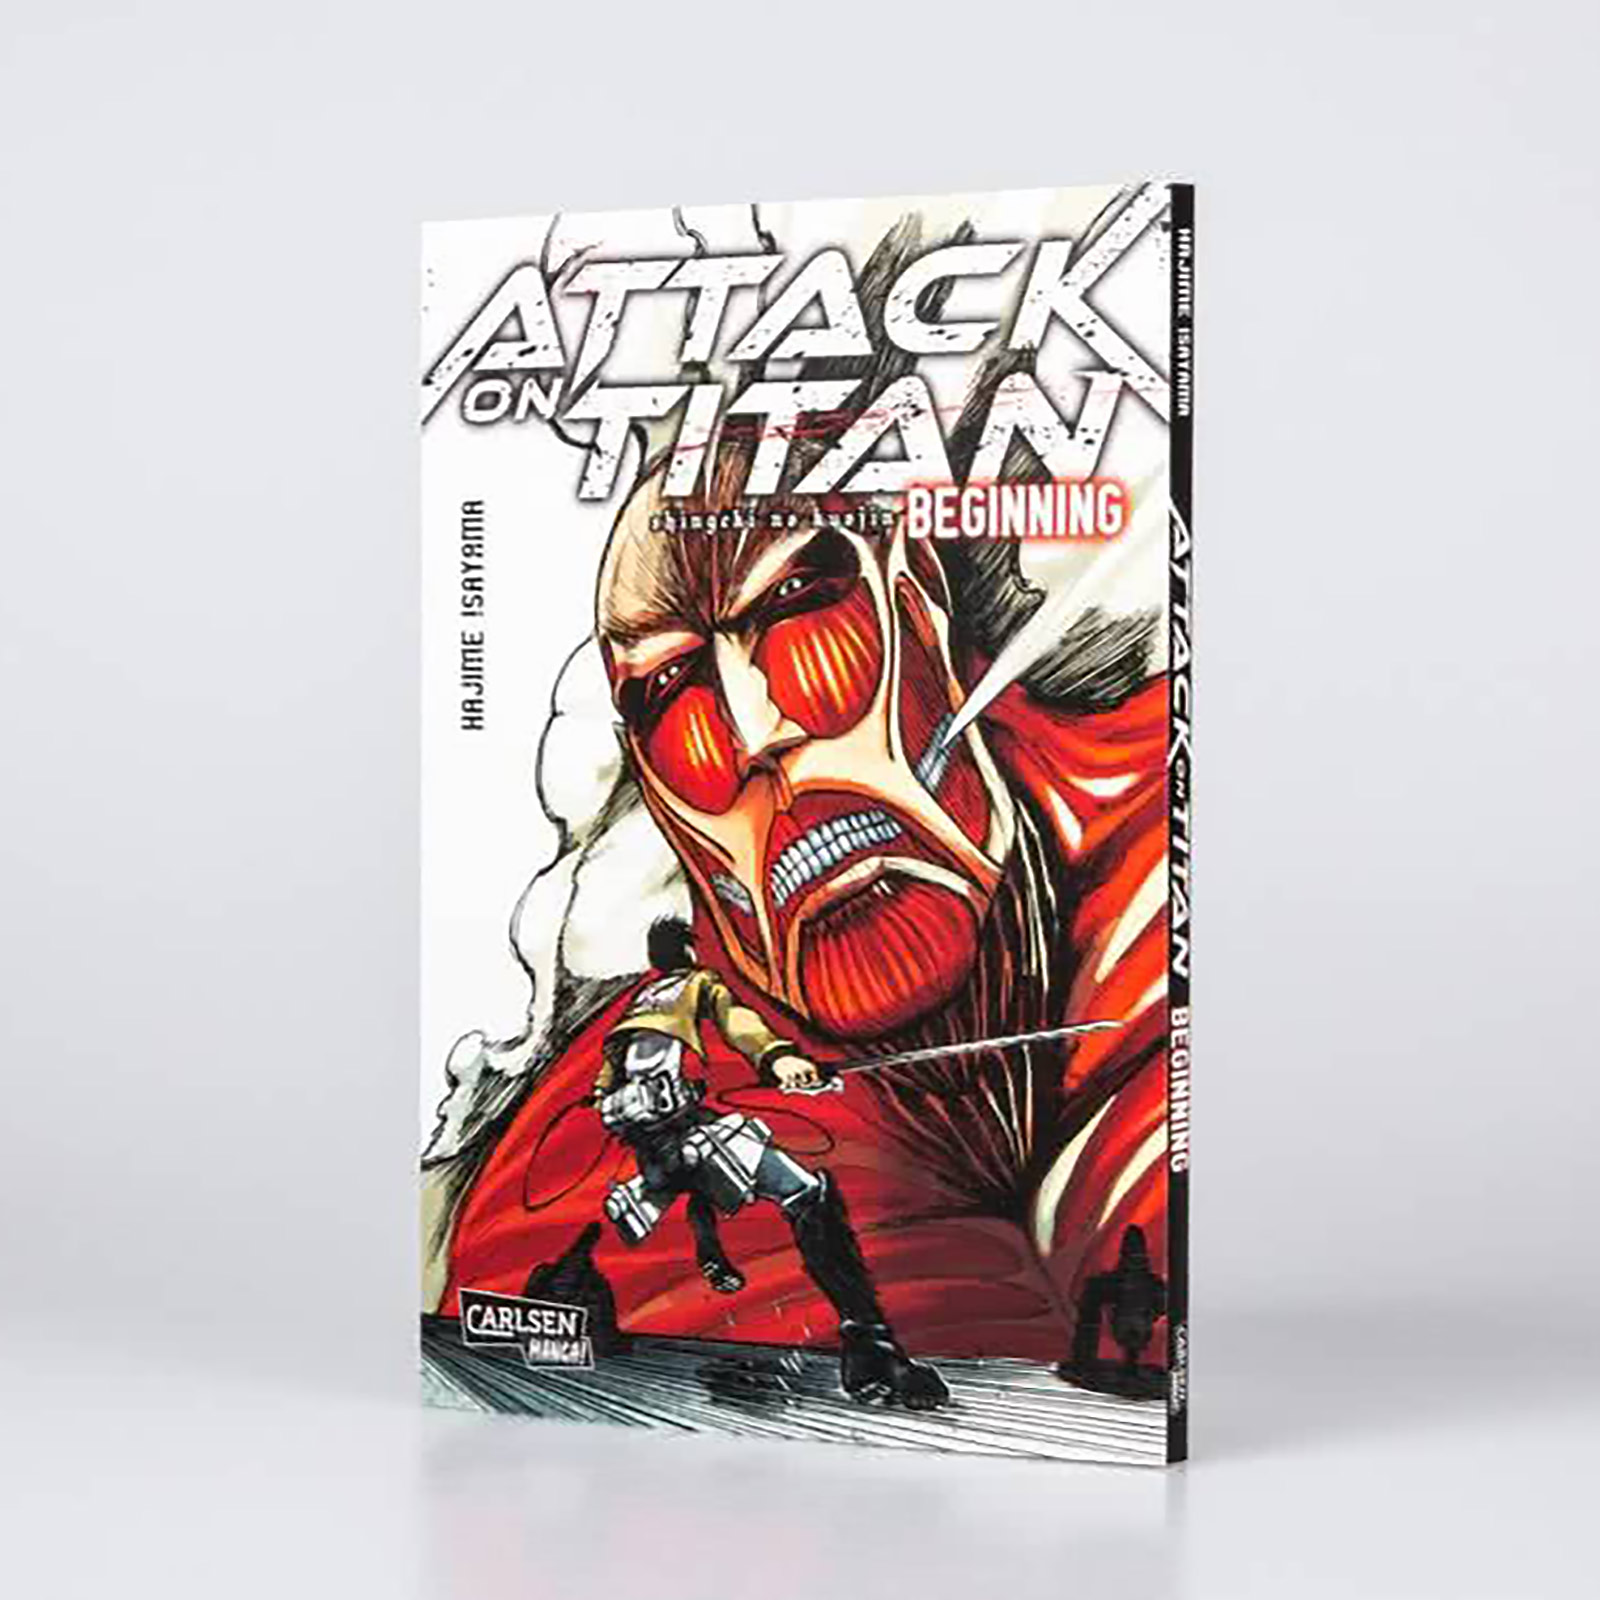 Attack on Titan - Volume 34 in Collector's Box with Extra